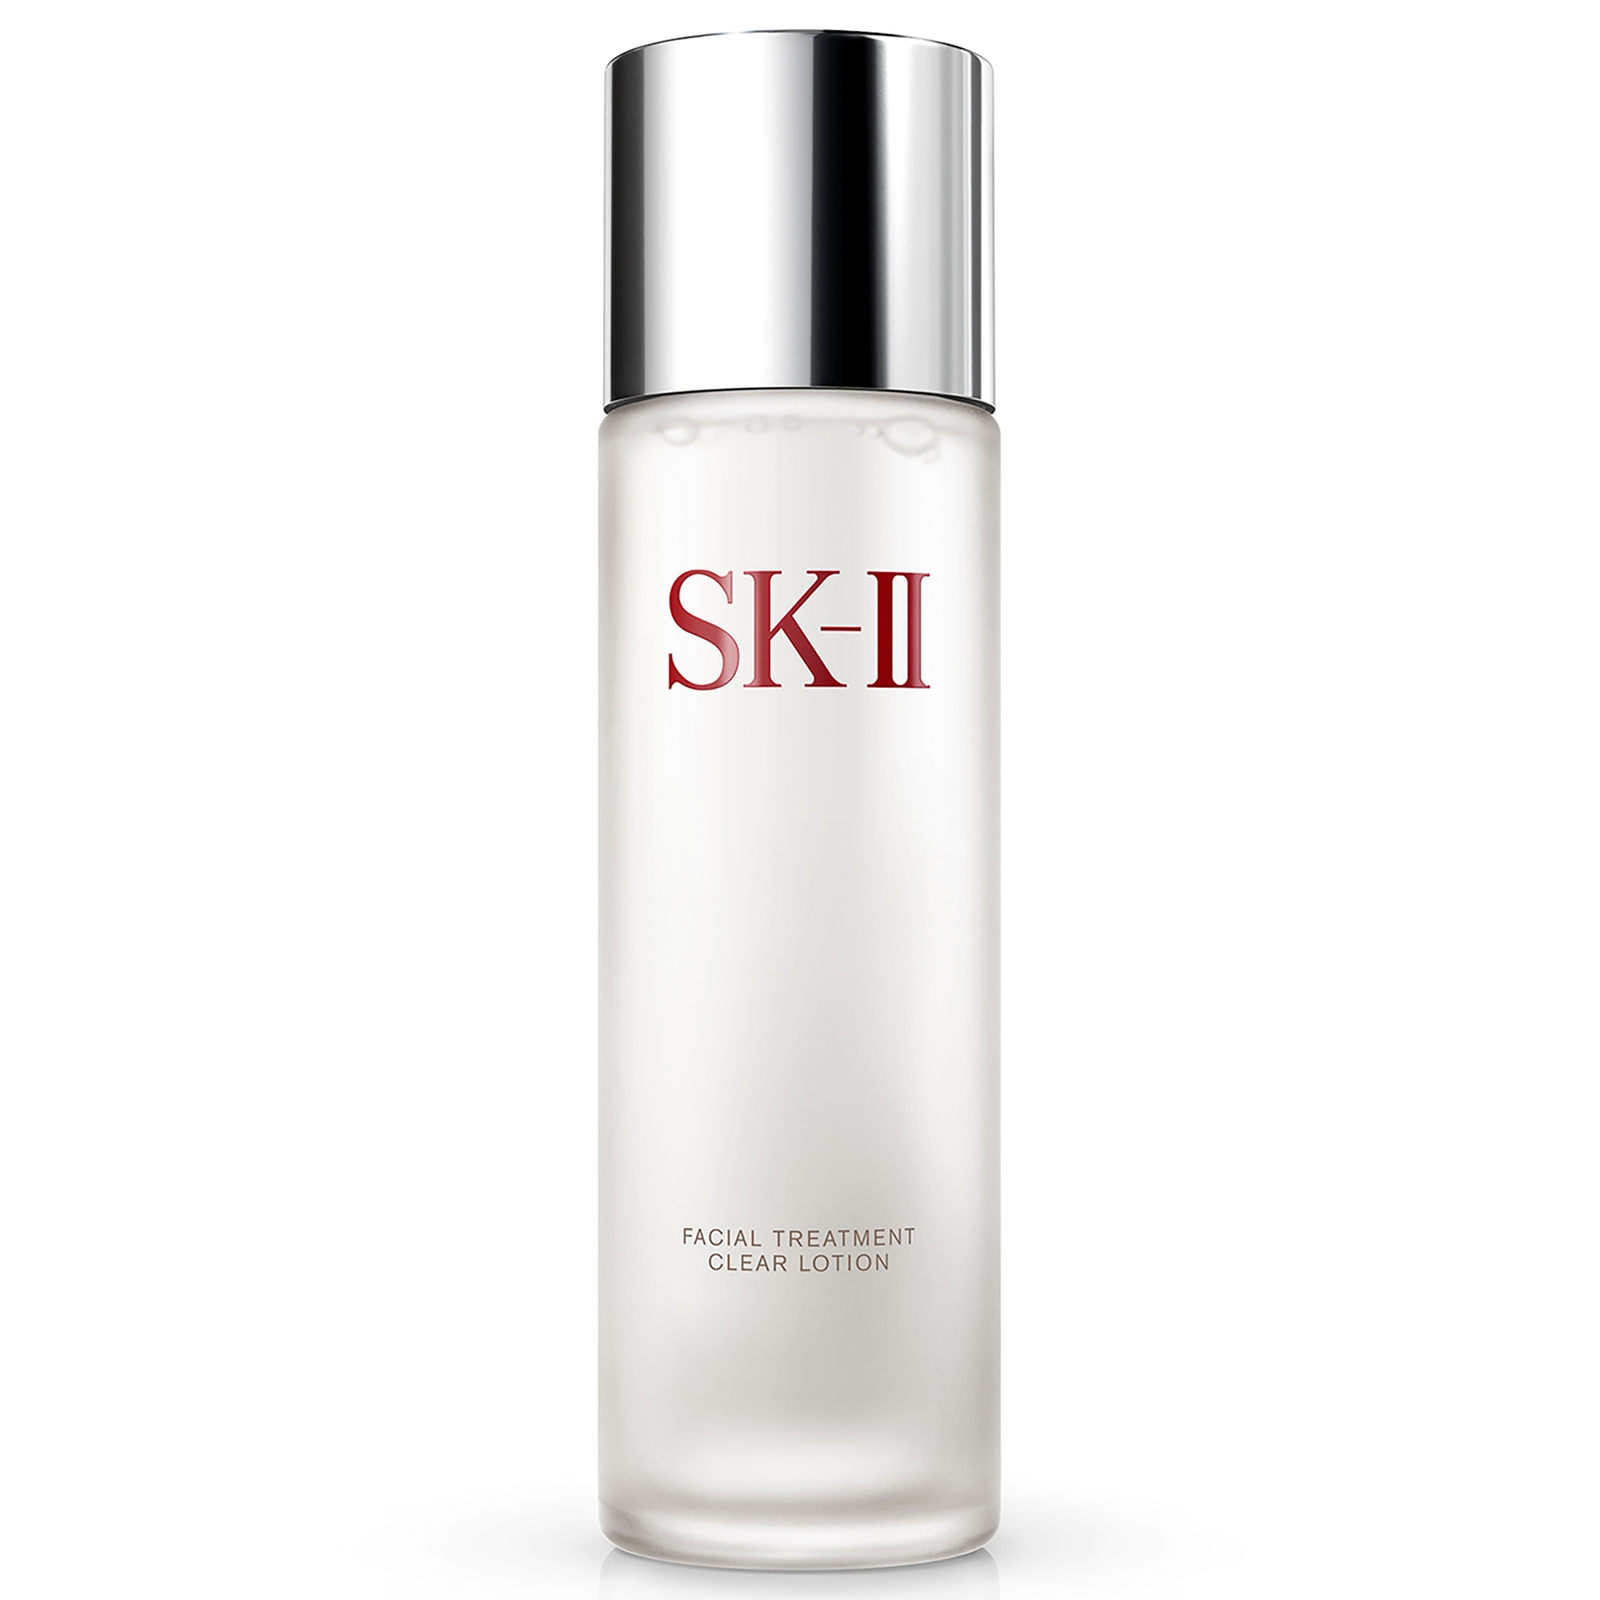 Sk-ii Facial Treatment Clear Lotion - Regular 160ml In White